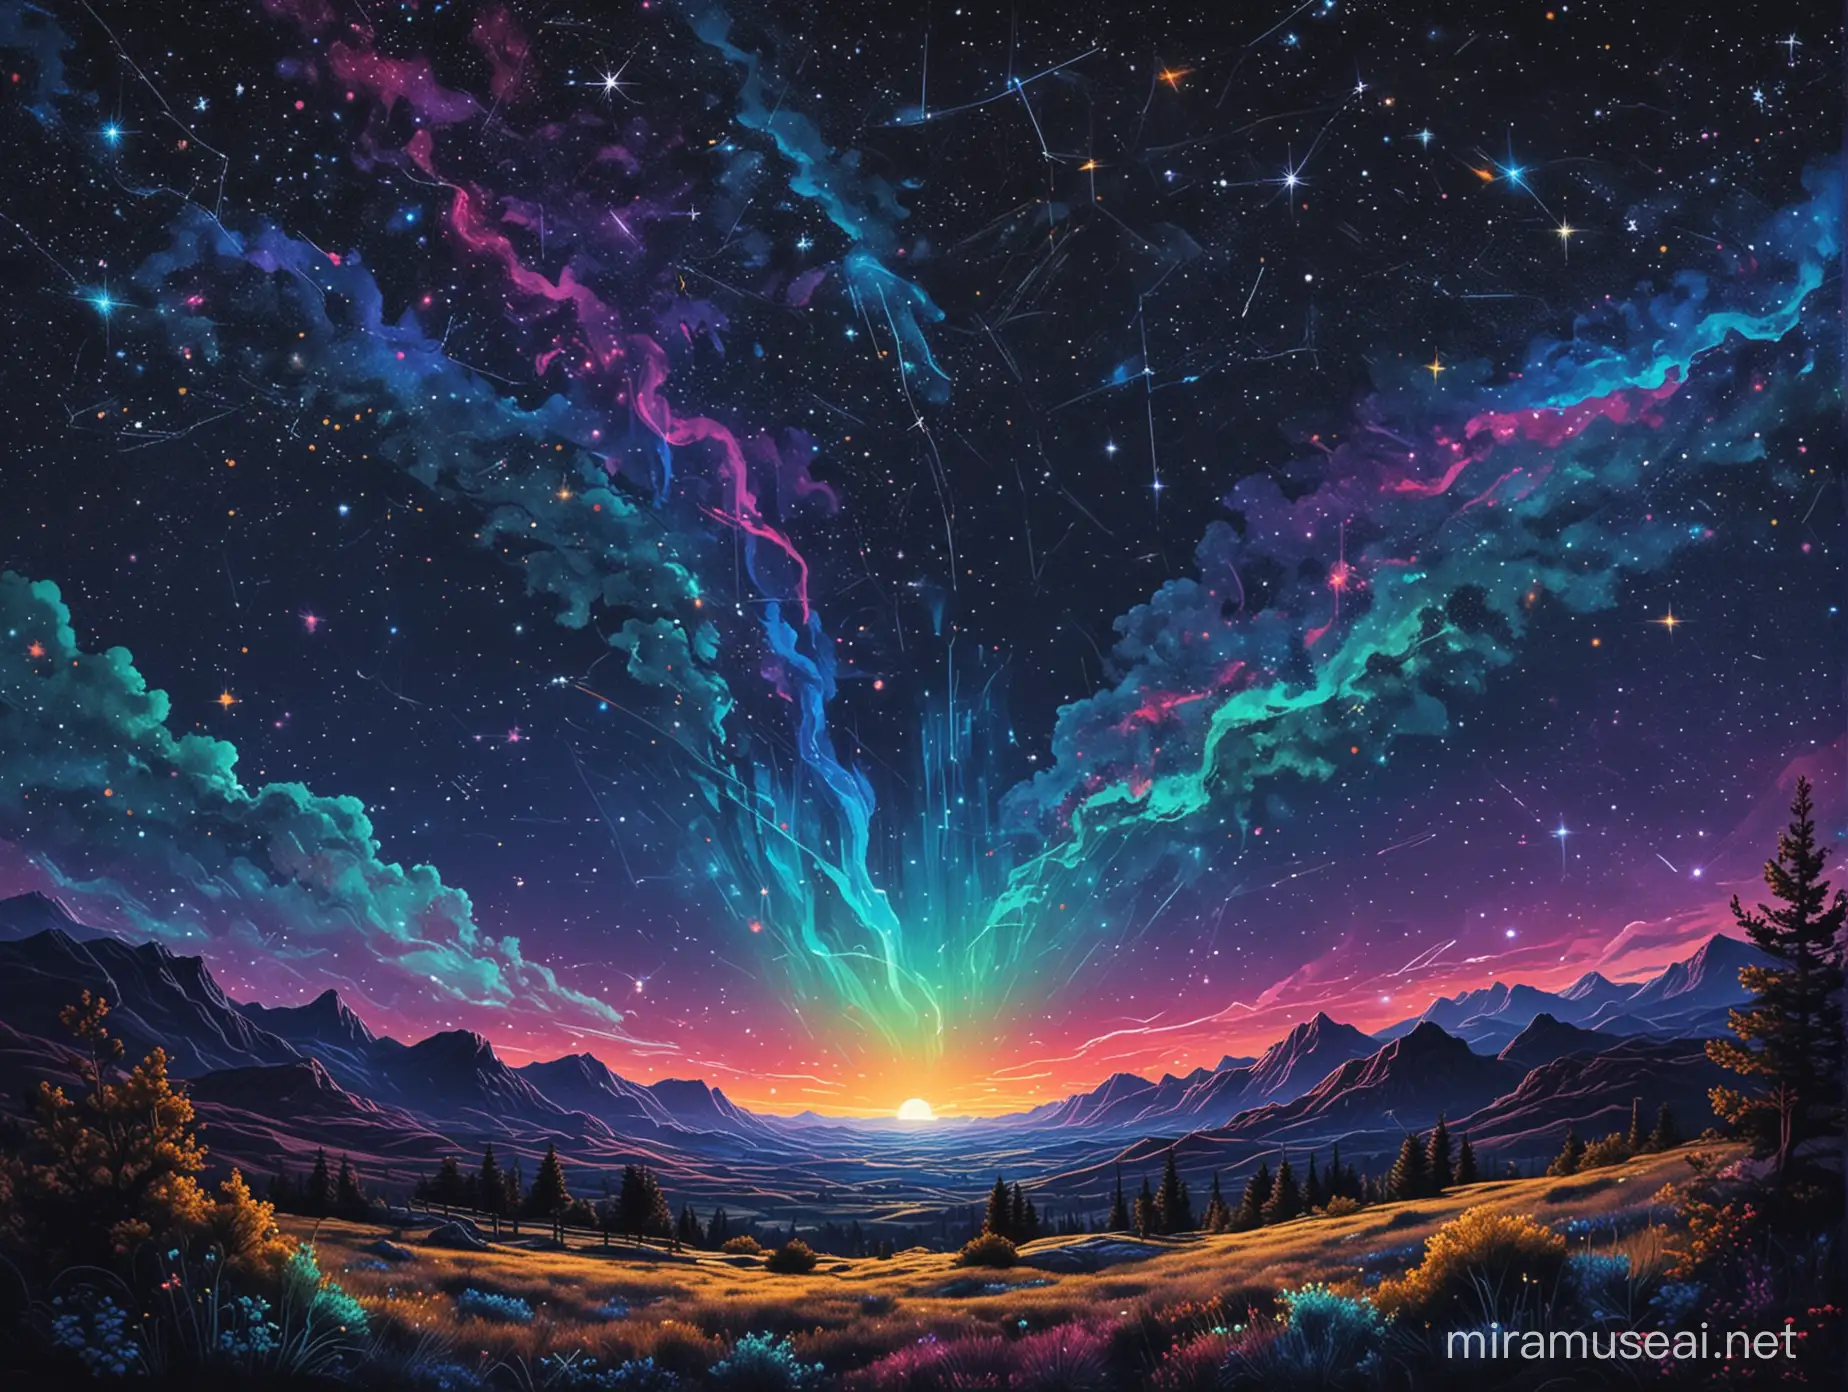 surreal starry night  ad some constellations and neon colors
